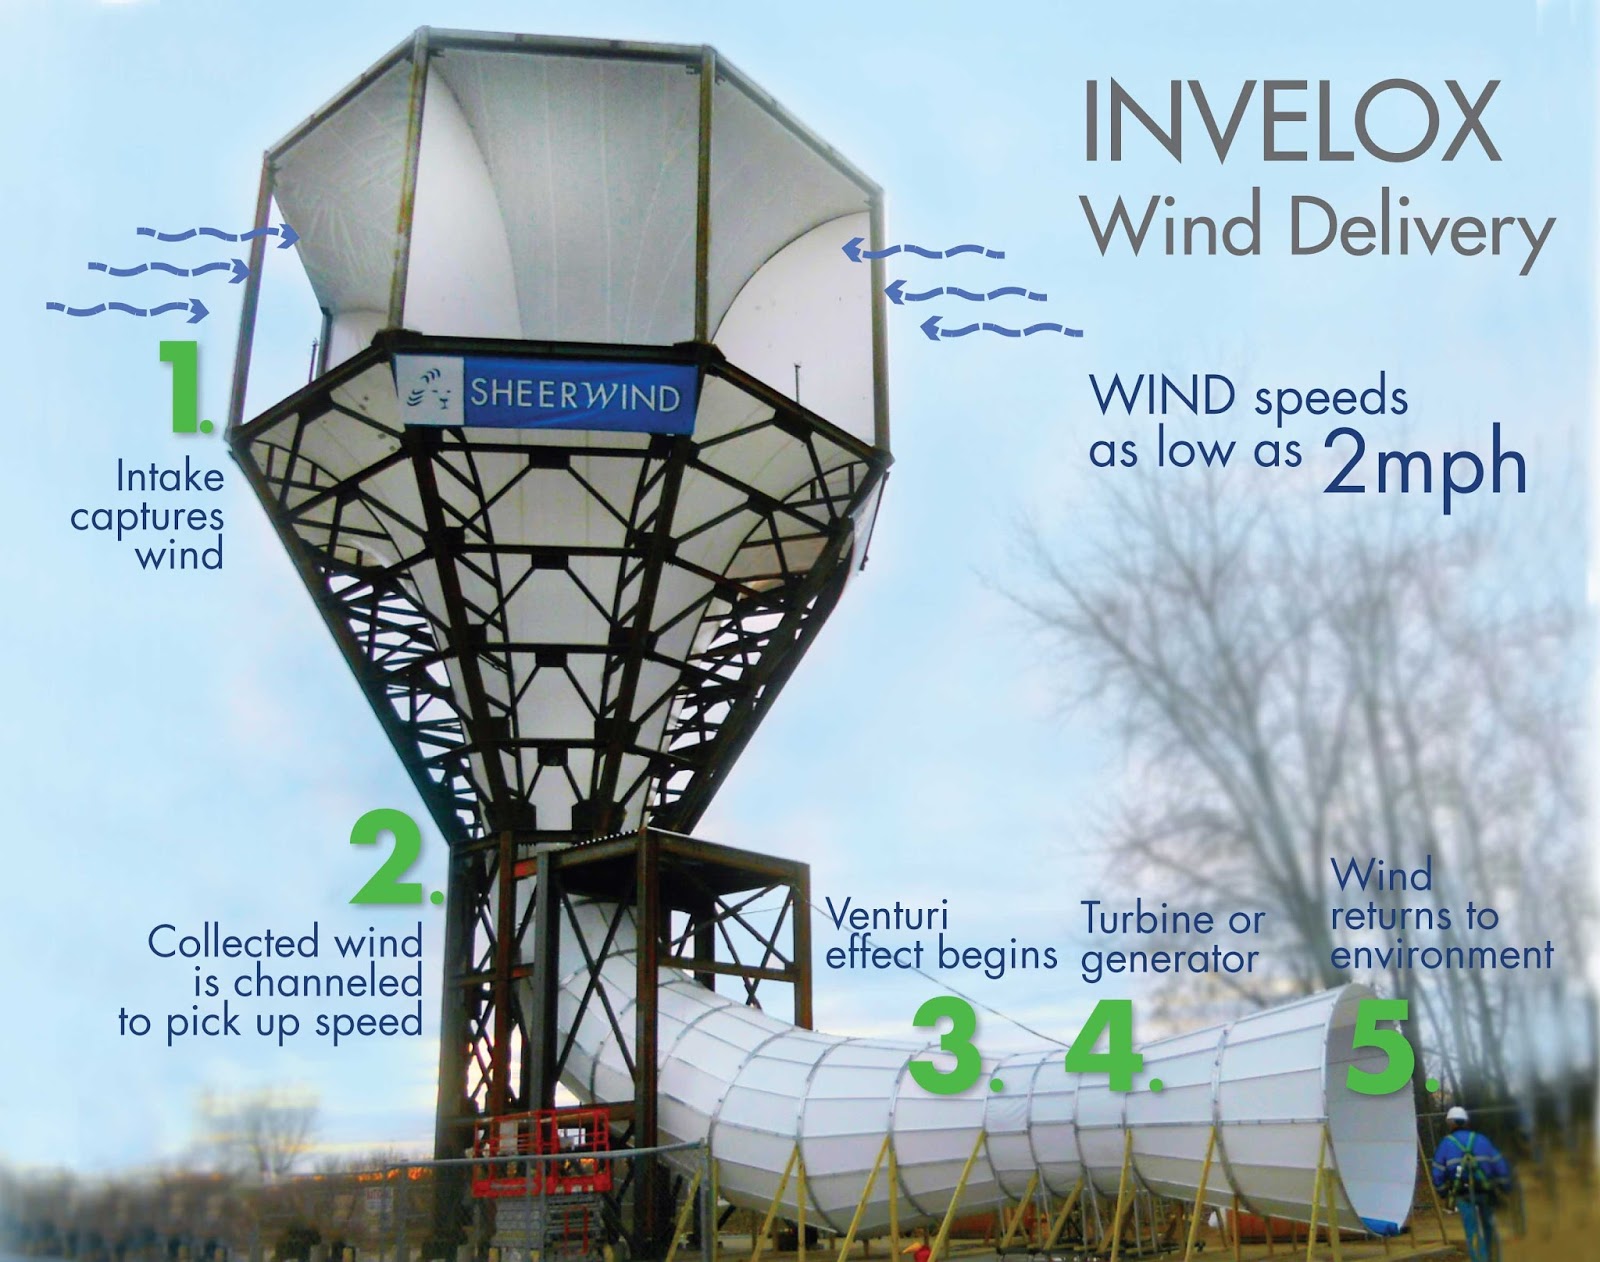 Funny Looking Tower Generates 600% More Electrical Energy Than Traditional Wind Turbines